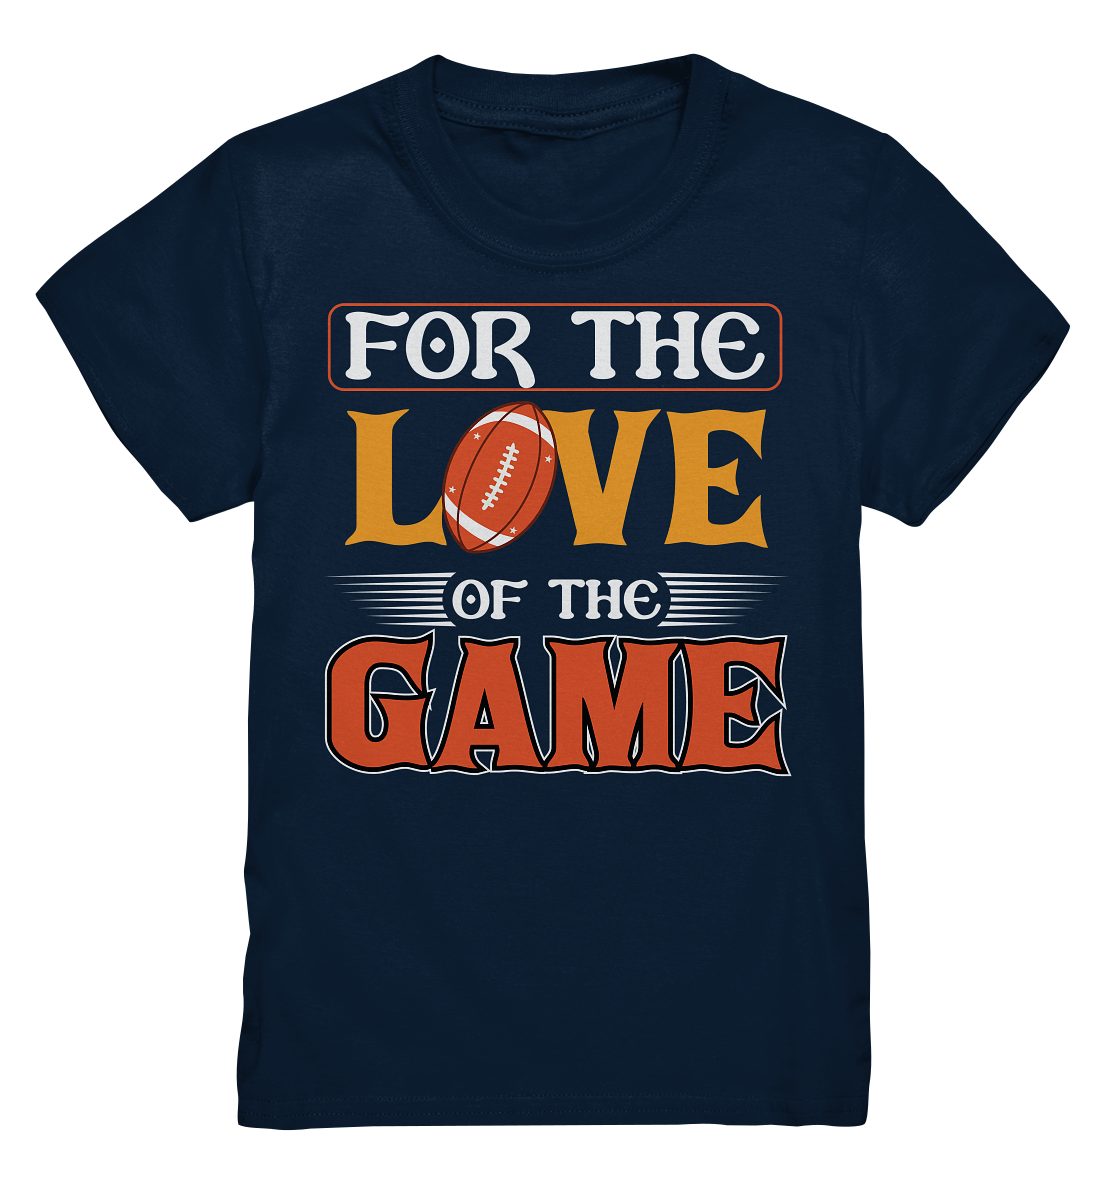 For the Love of the Game - Kids Premium Shirt - Football Unity Football Unity